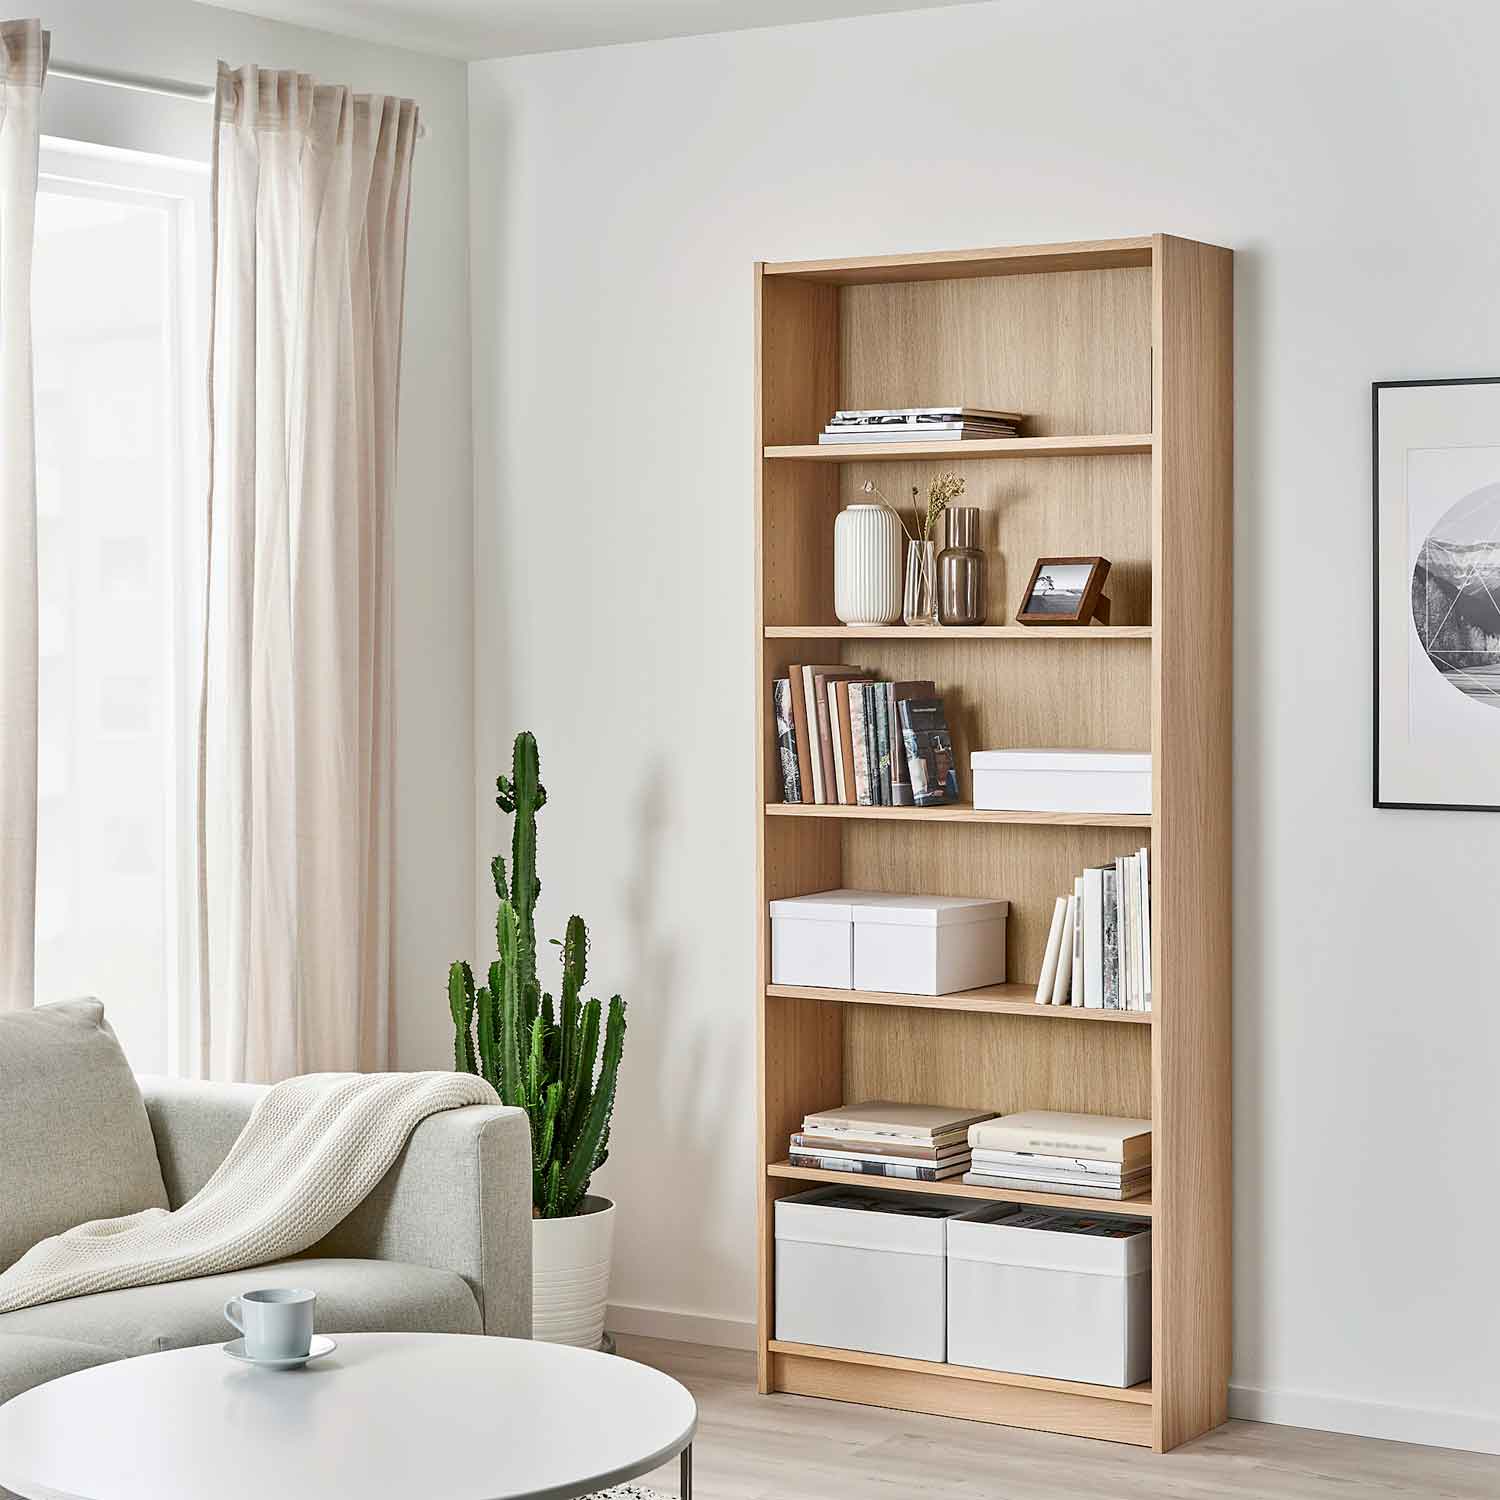 Furniture Source Philippines, Billy Bookcase Storage Boxes